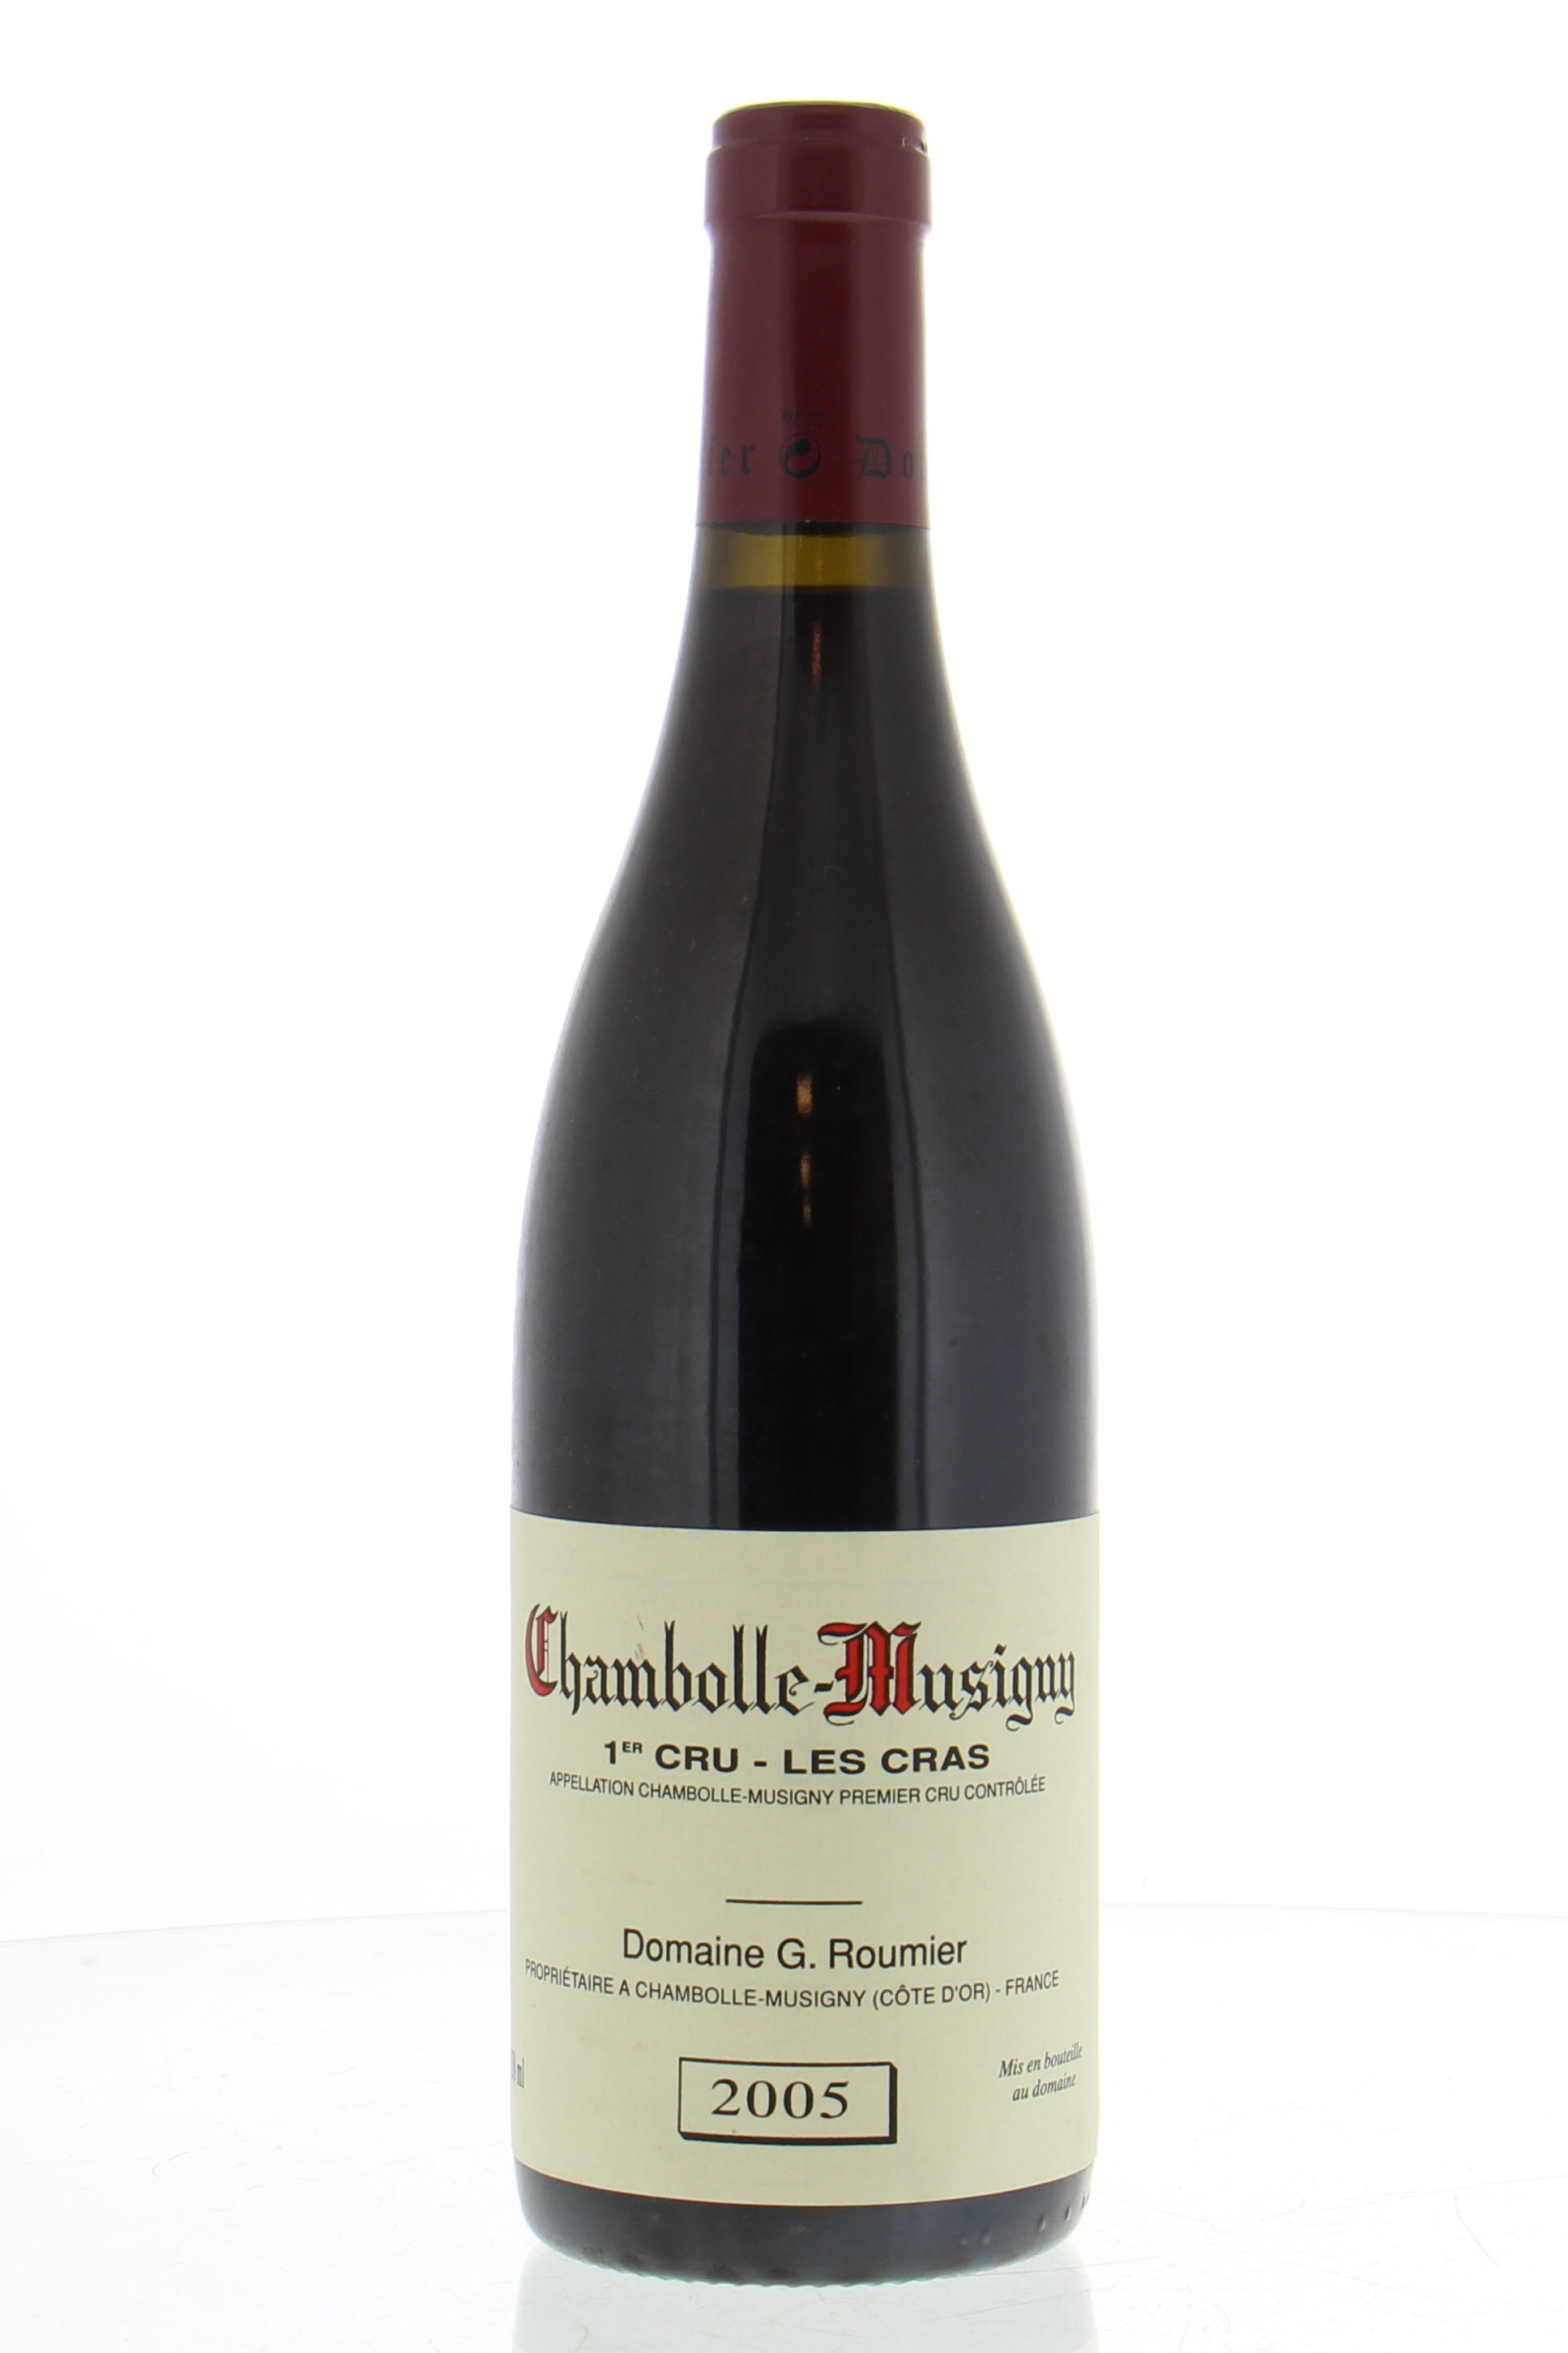 Georges Roumier - Chambolle Musigny les Cras 1cru 2005